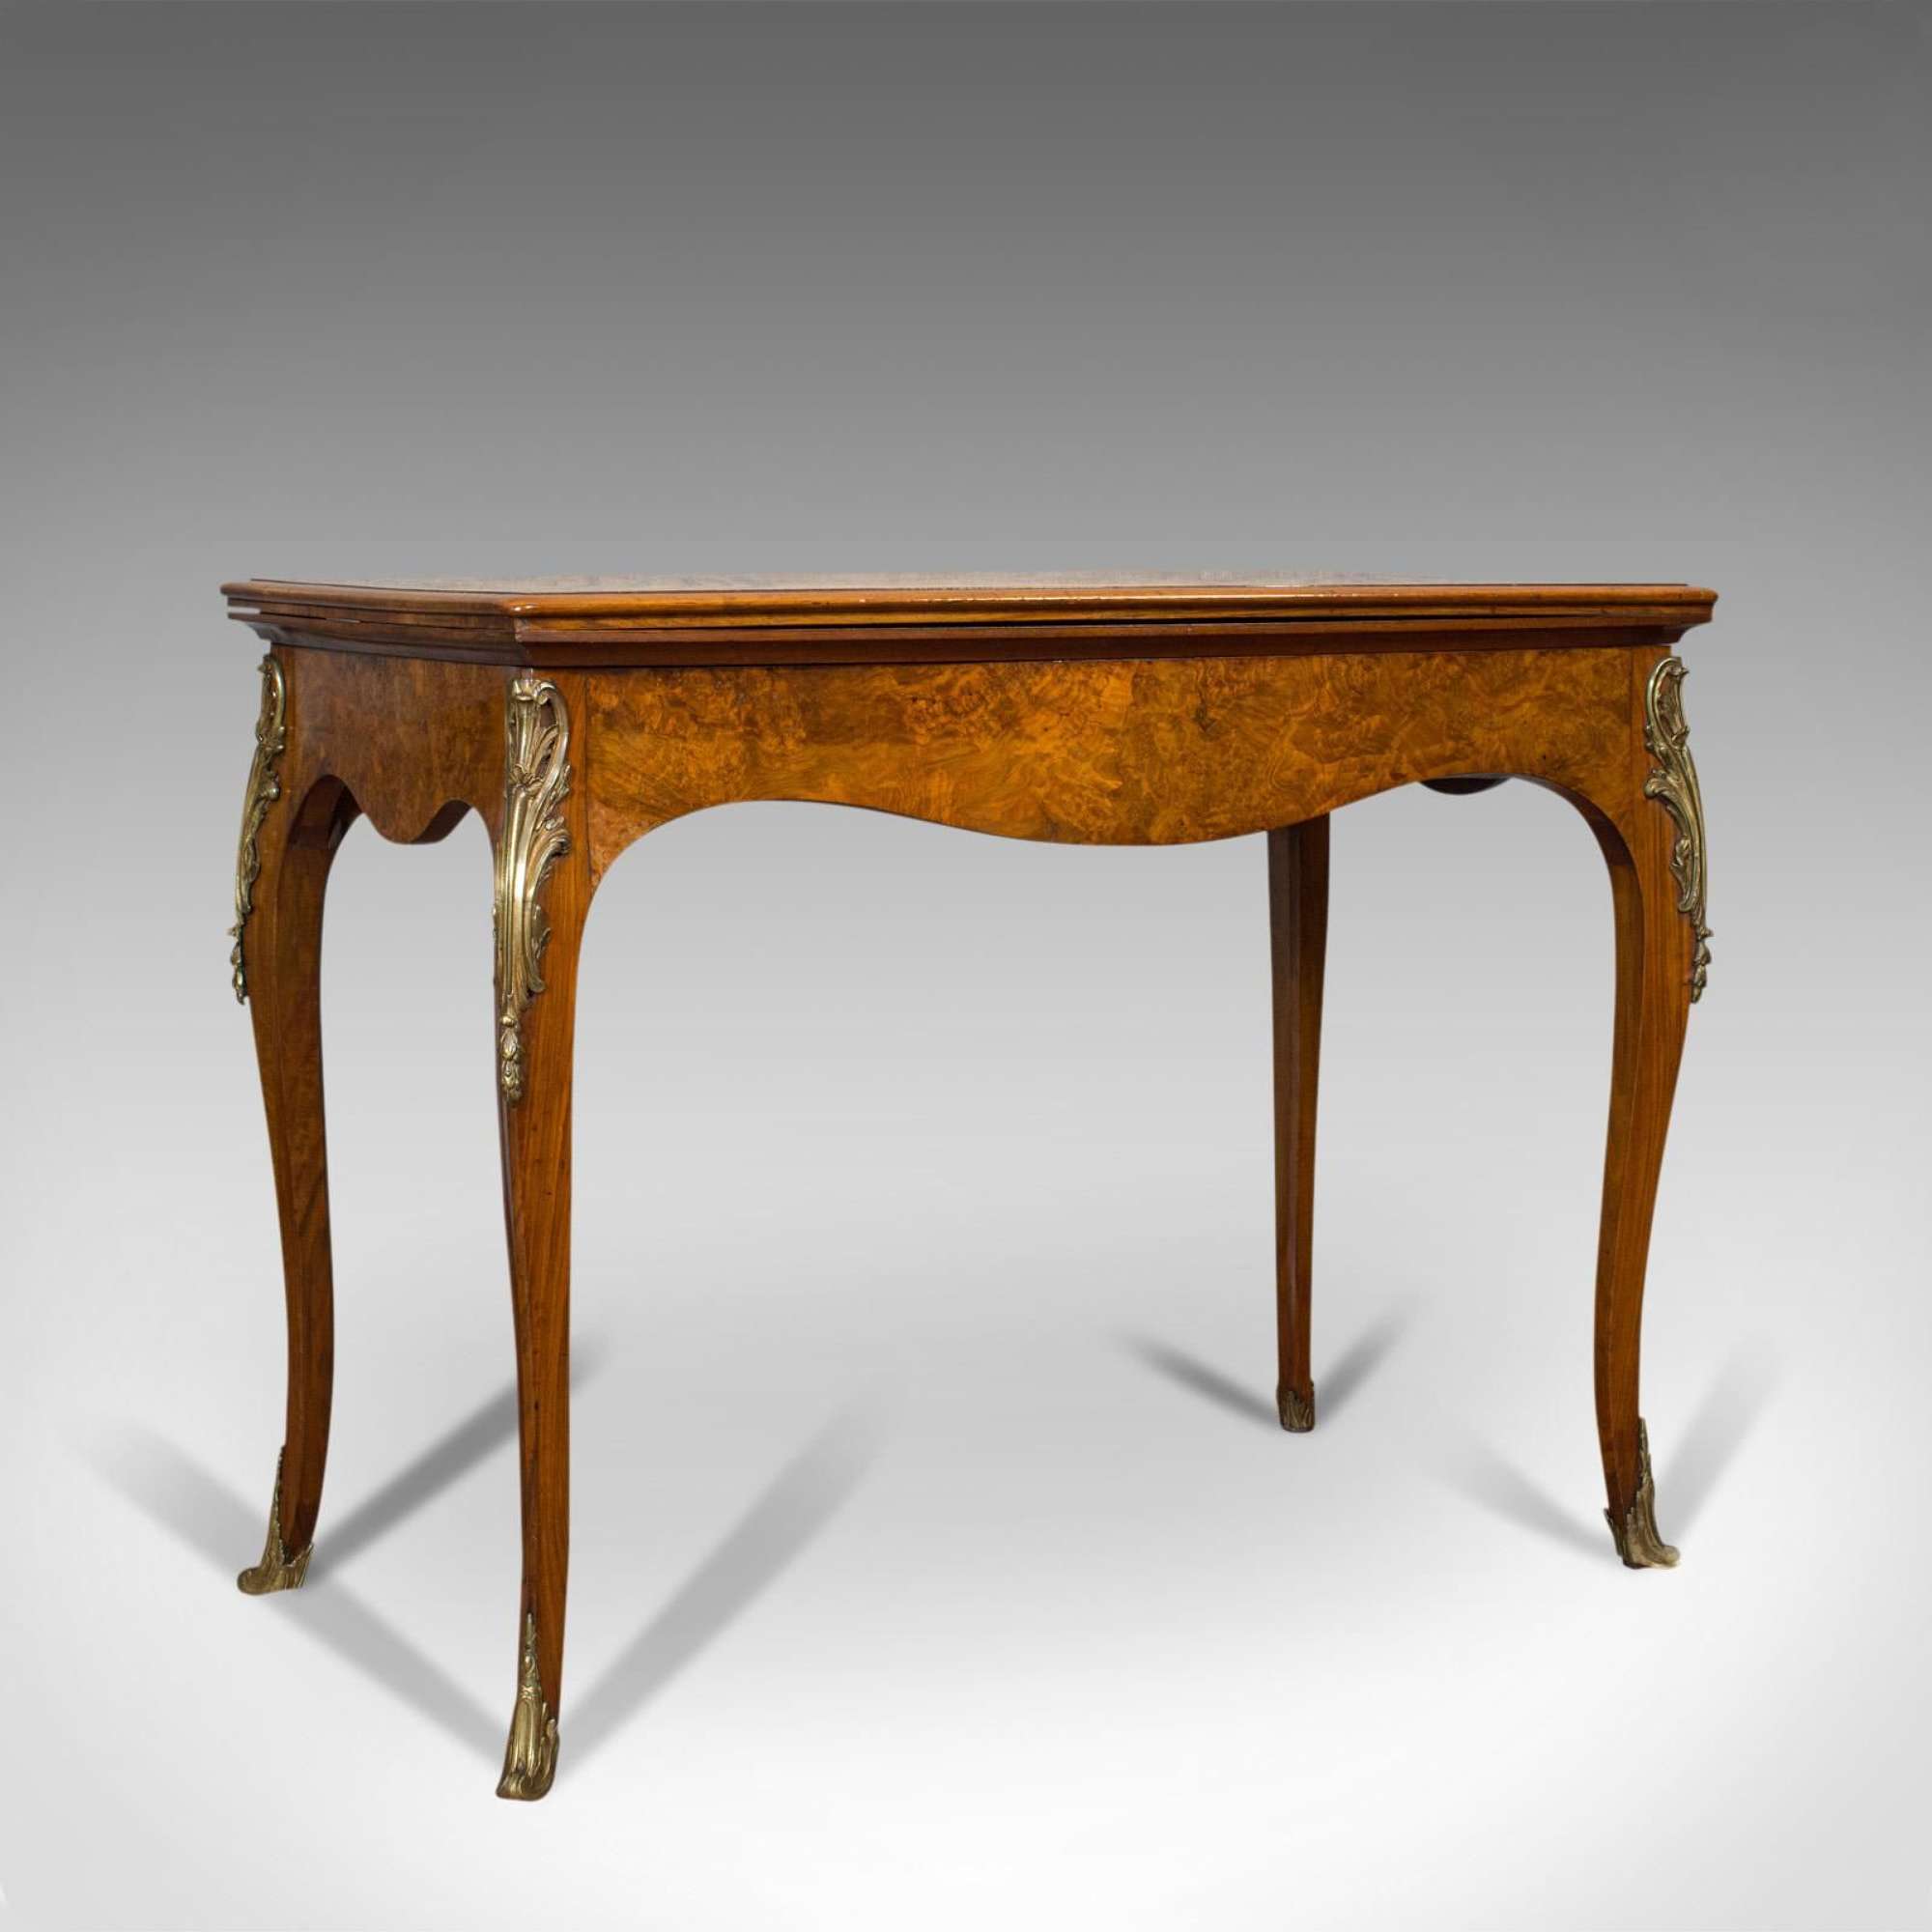 Antique Card Table, French, Burr Walnut, Fold Over, Games, Victorian C.1870